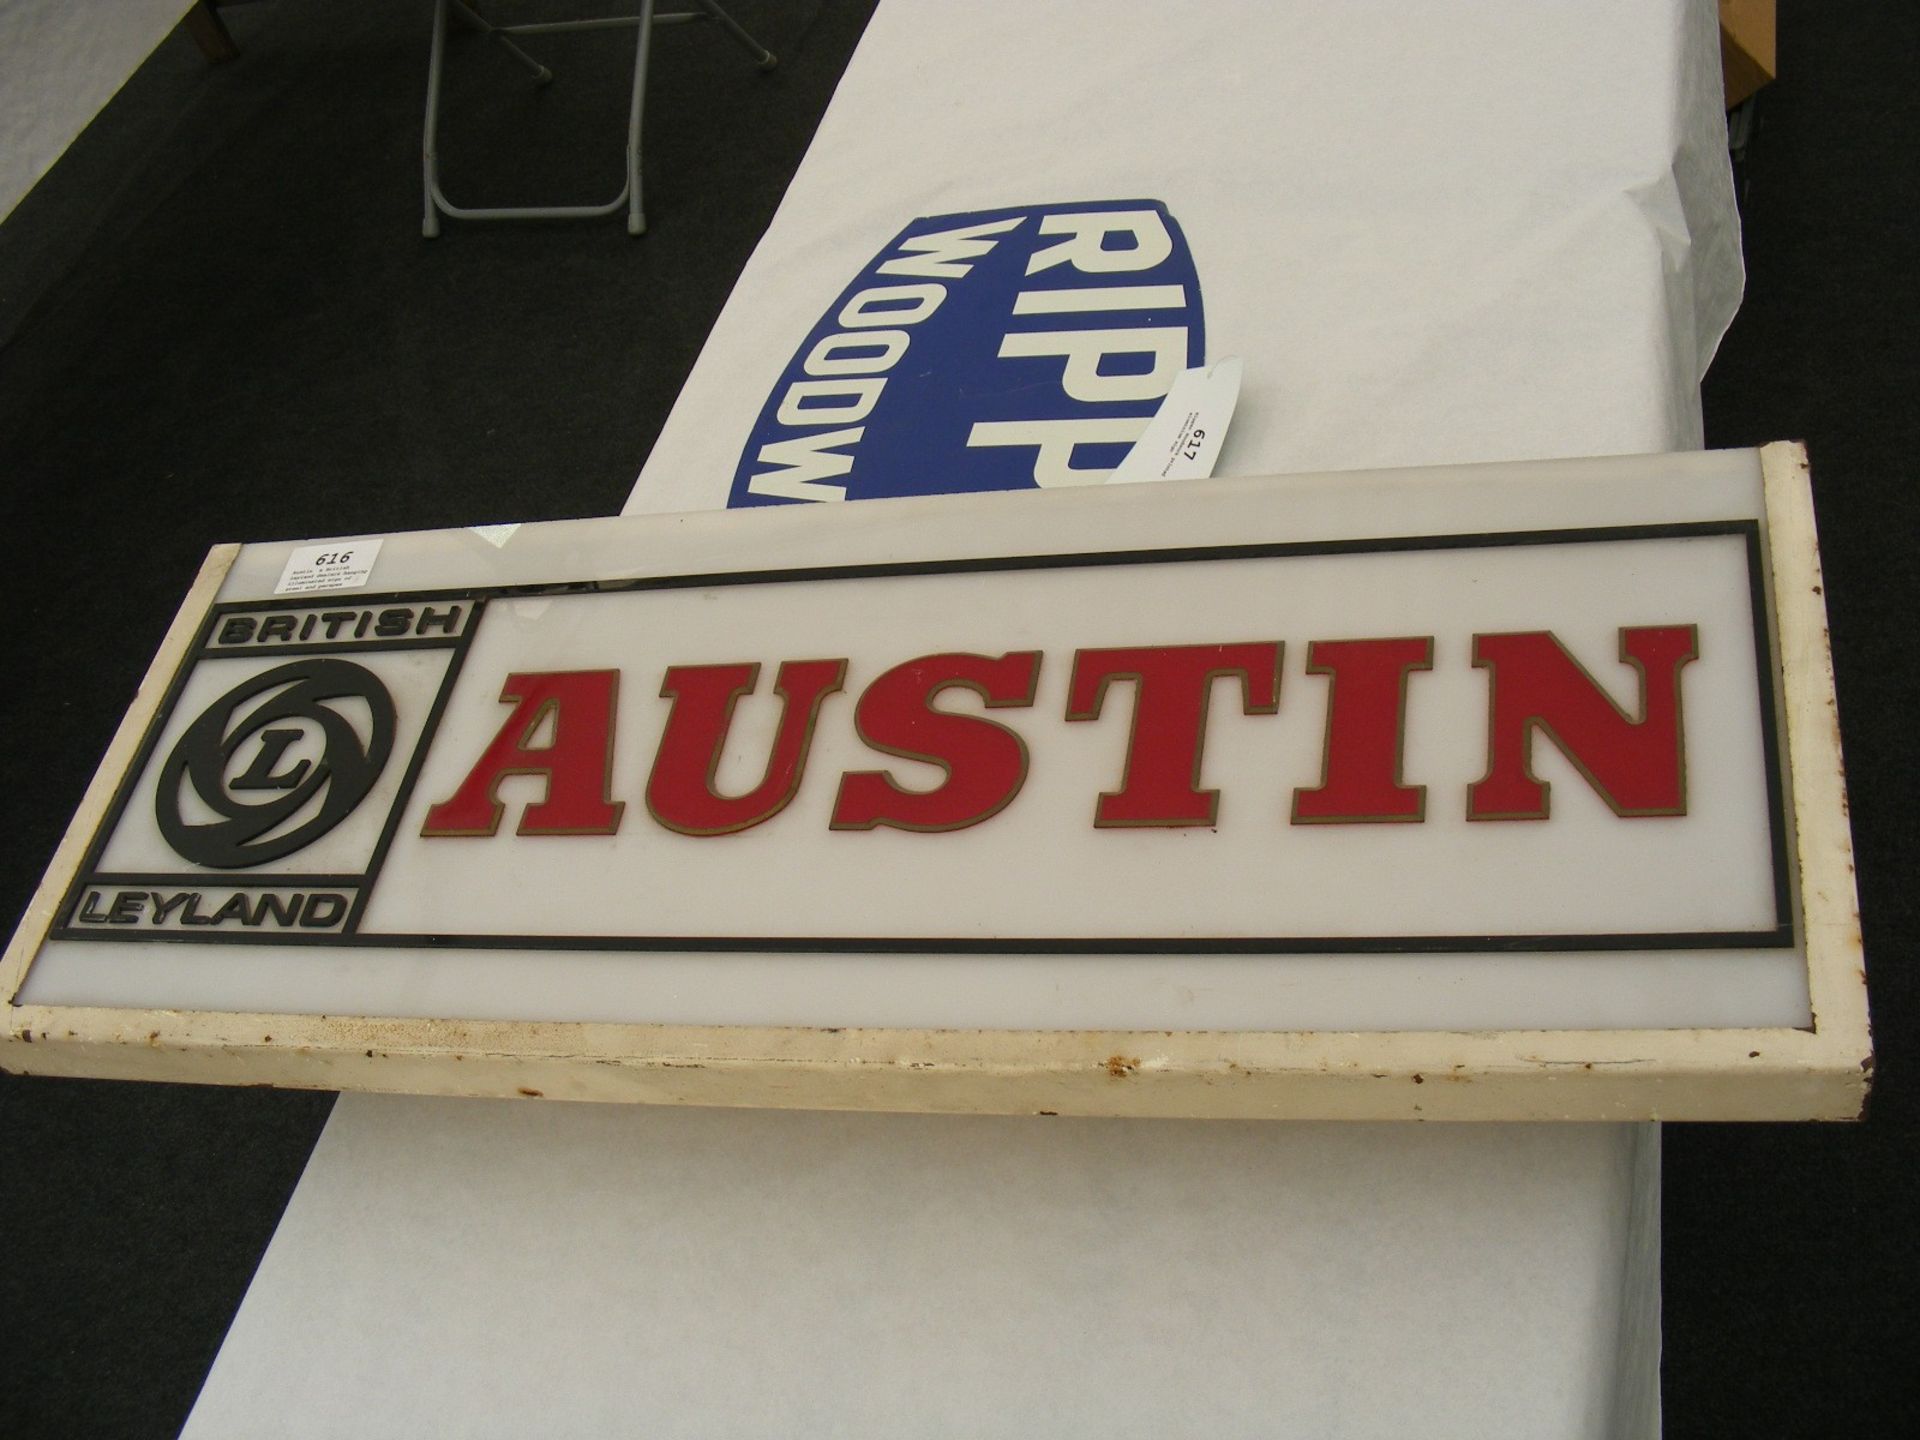 Austin, a British Leyland dealers hanging illuminated sign of steel and perspex construction (36'